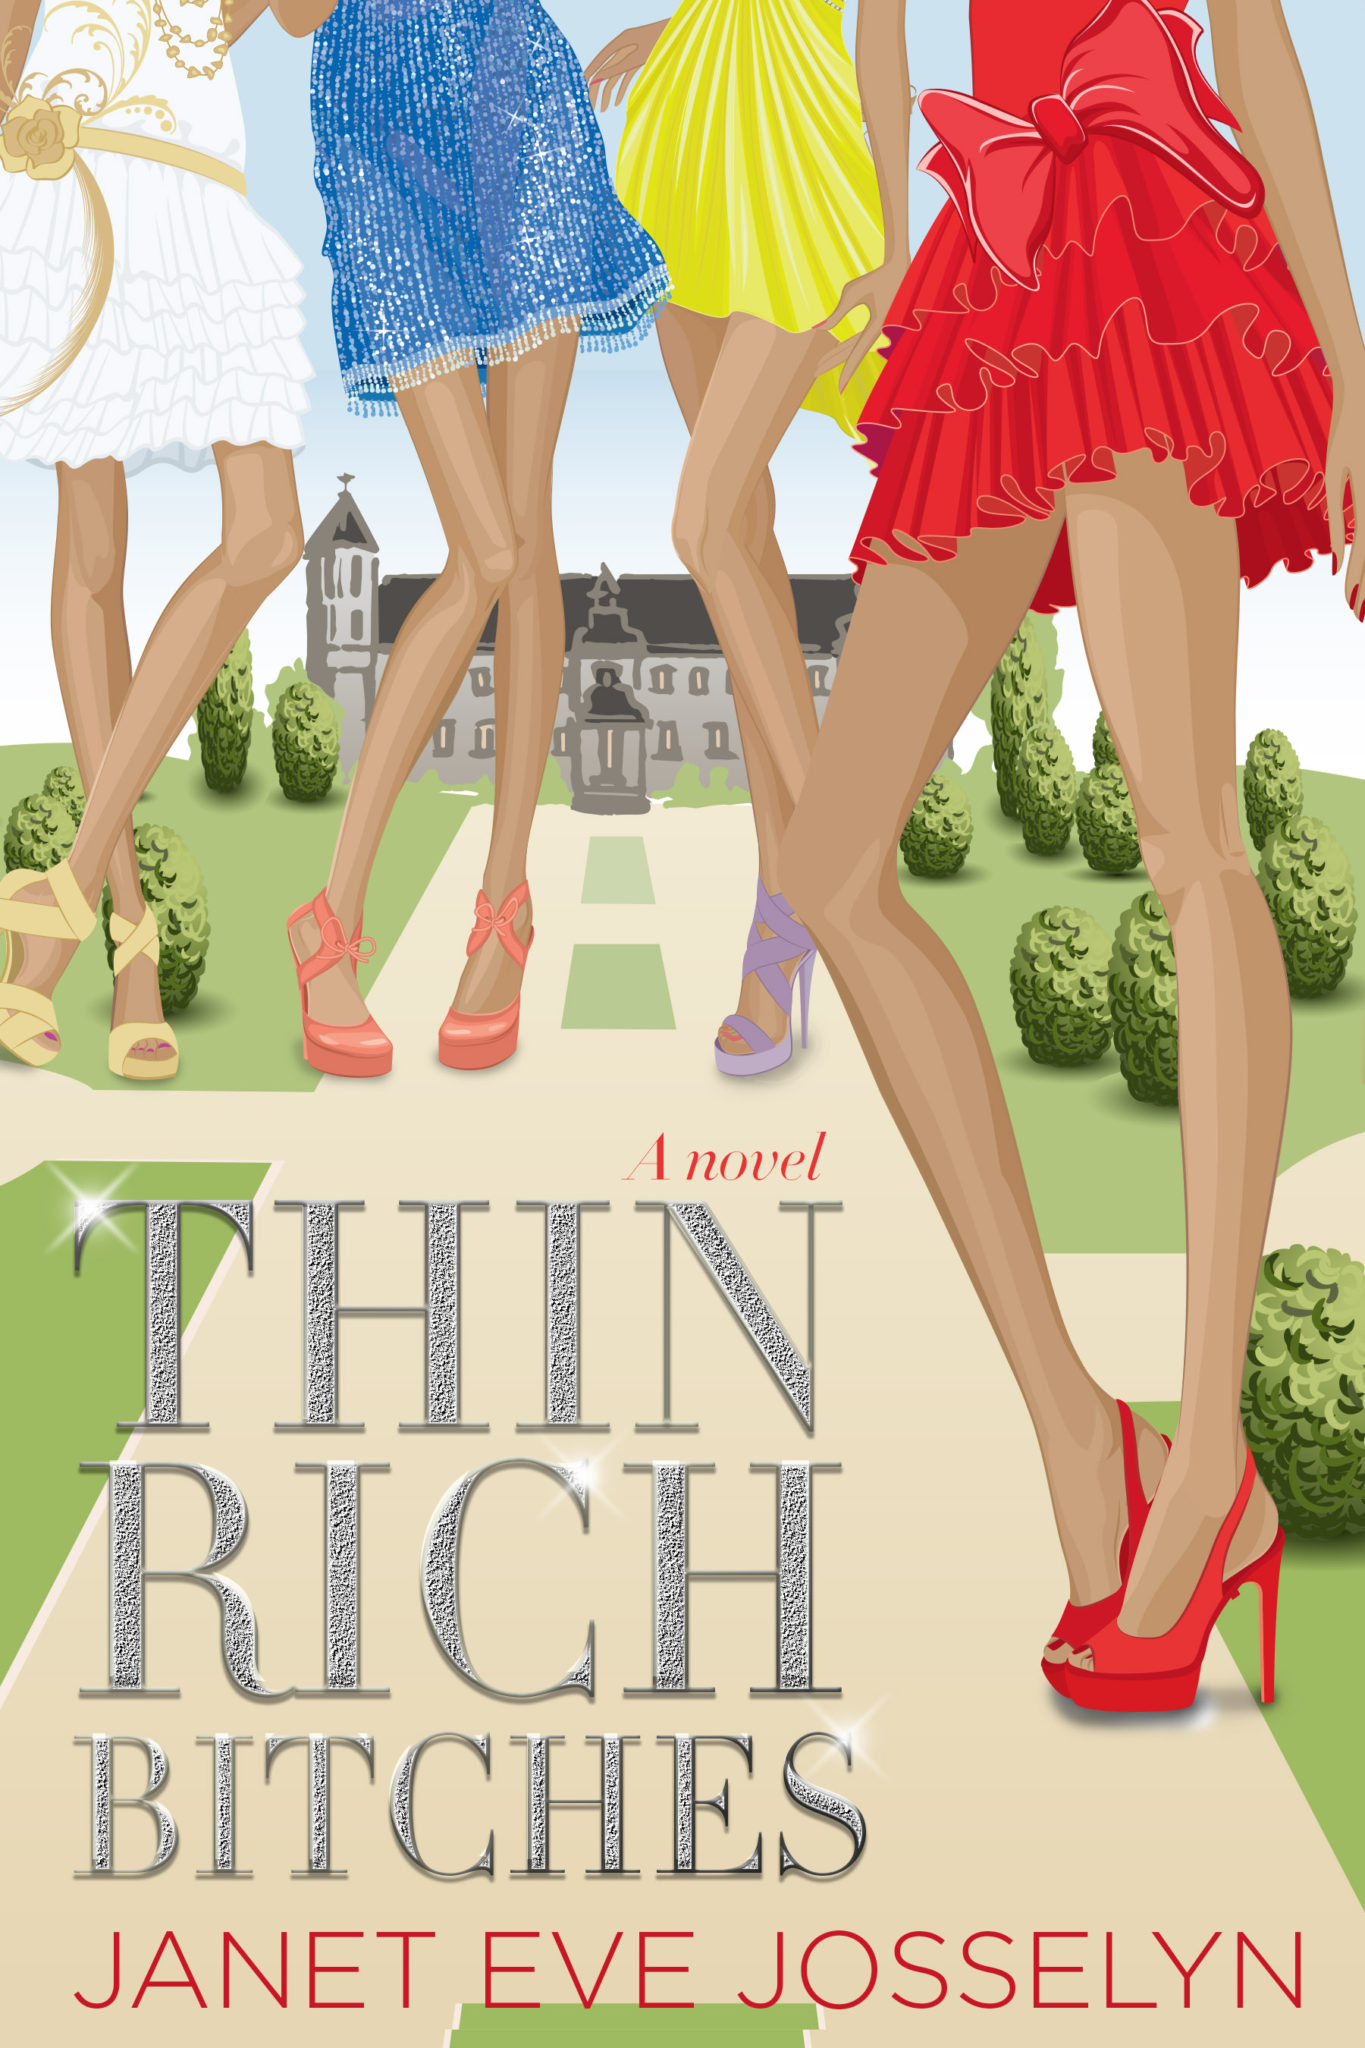 Thin Rich Bitches by Janet Eve Josselyn